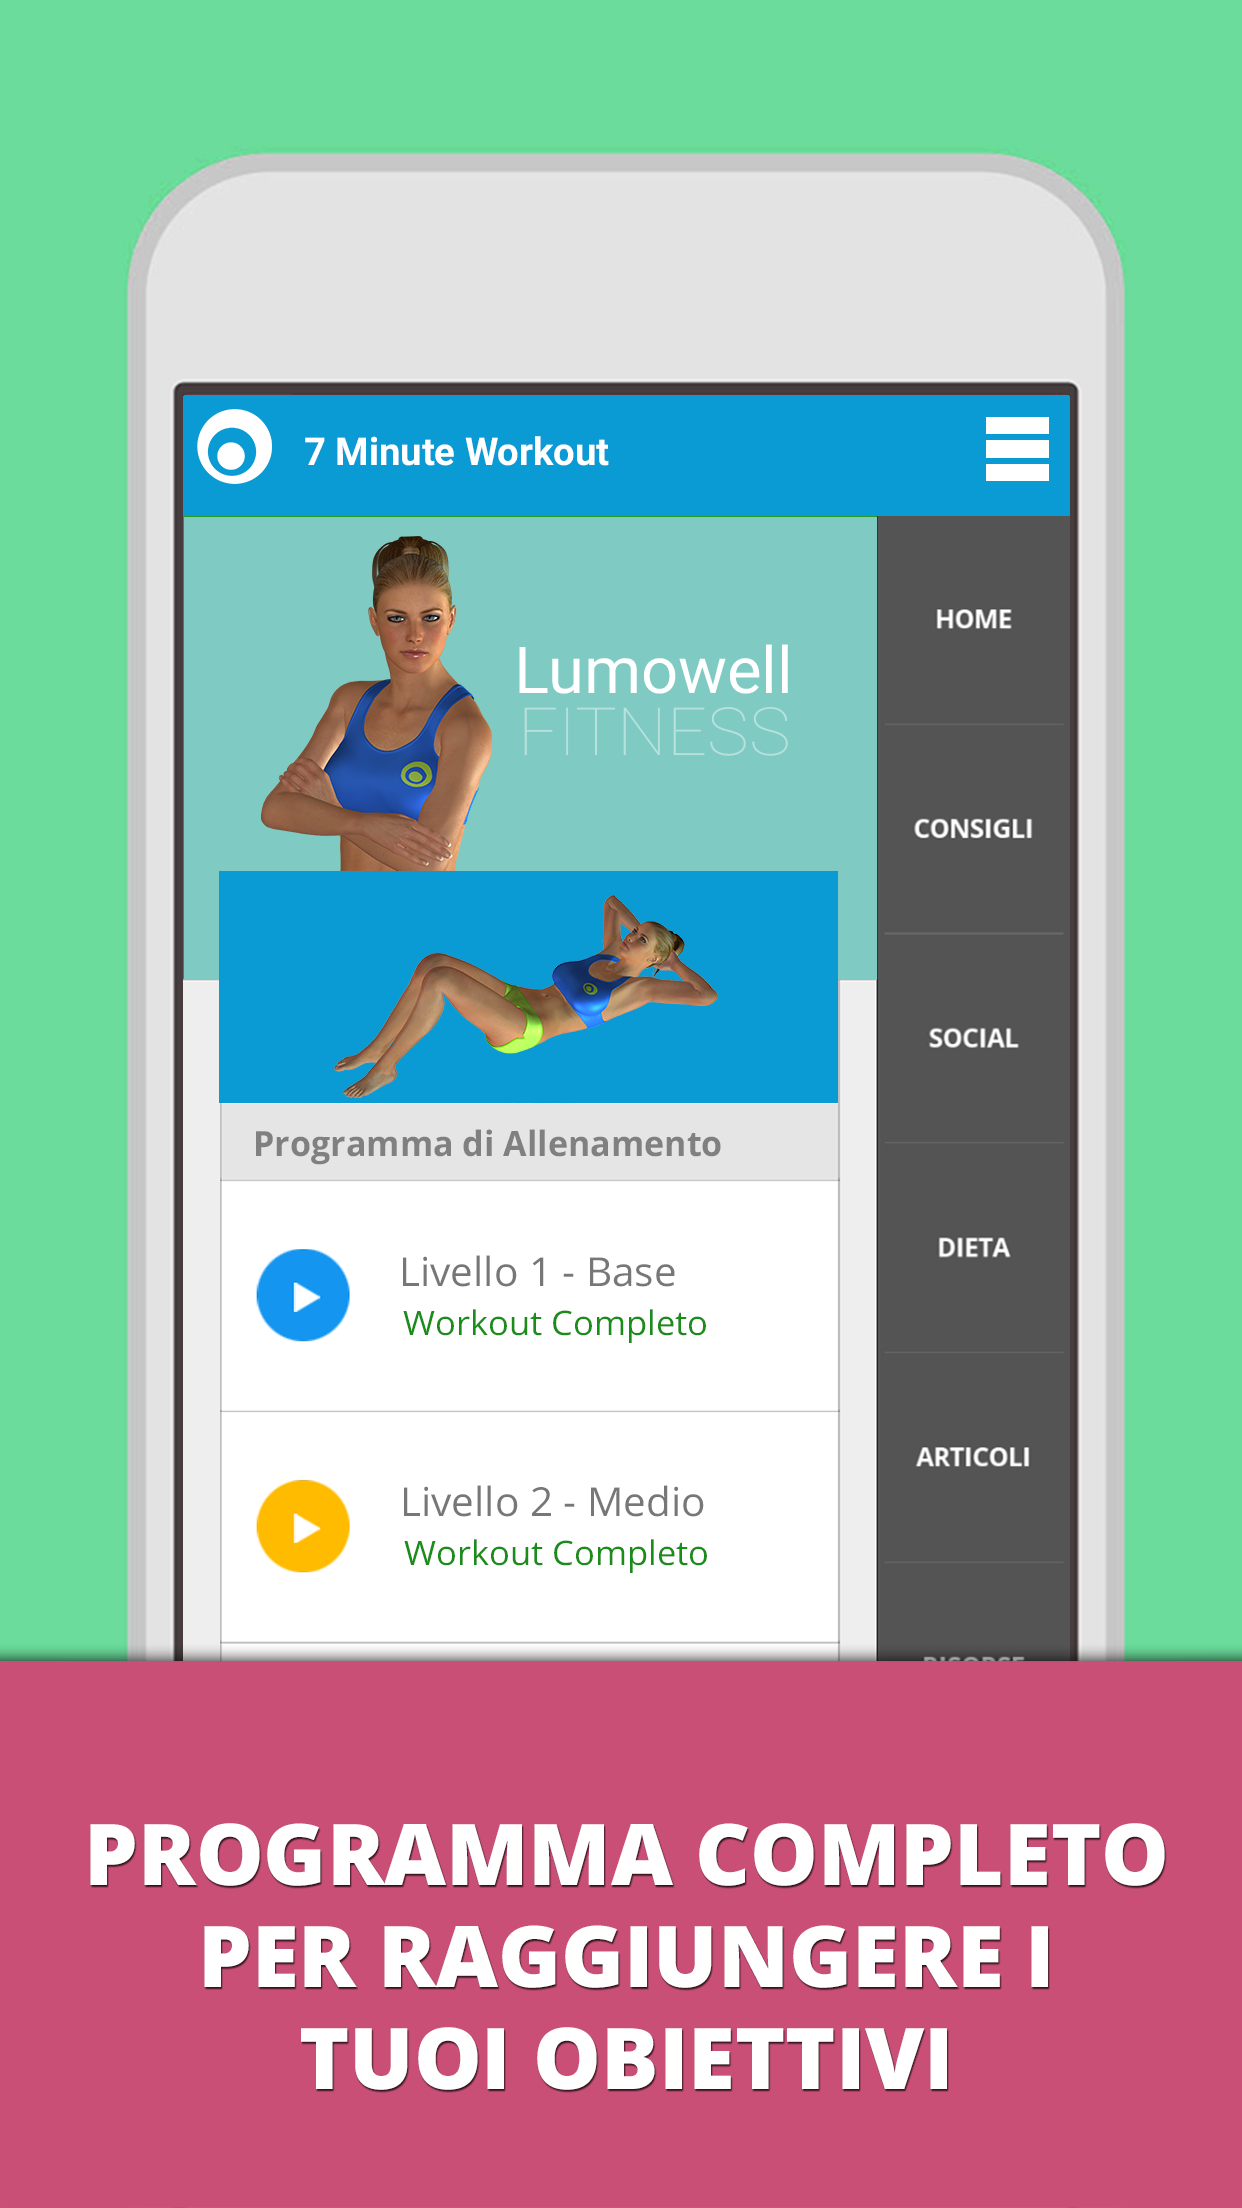 Android application 7 Minute Workout - Weight Loss screenshort